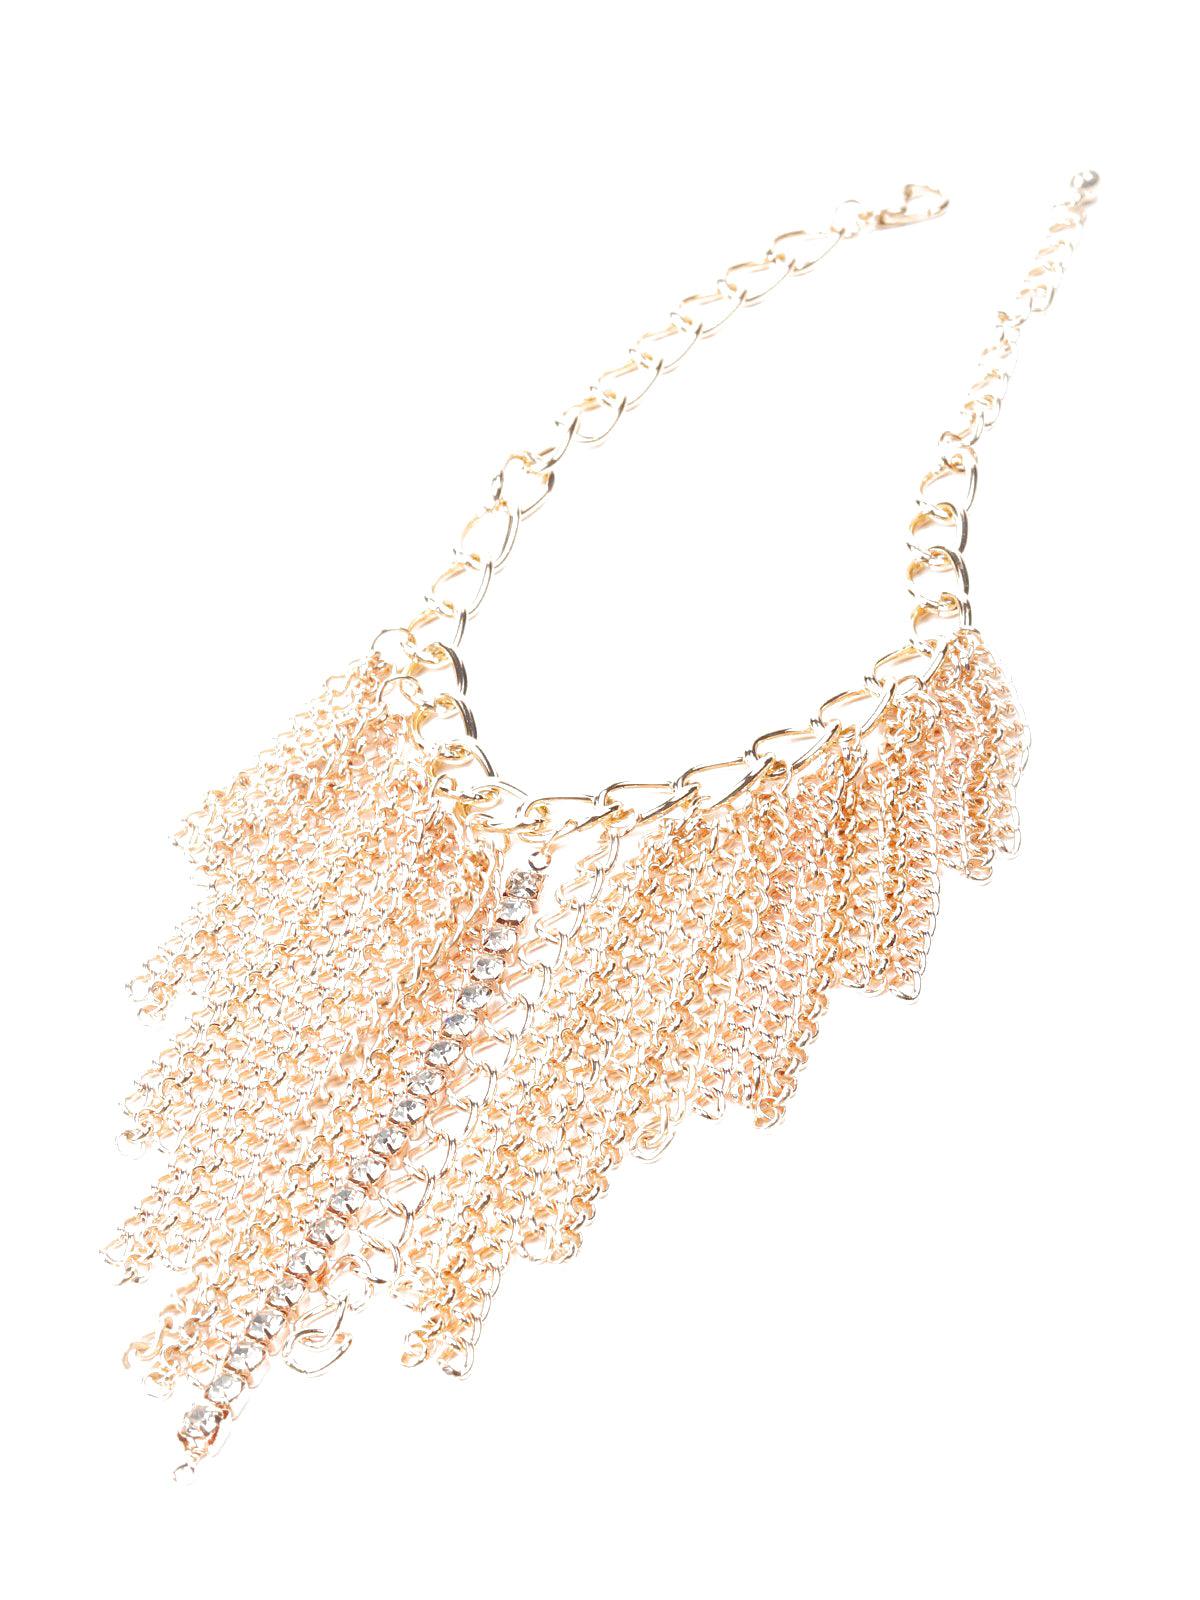 Women's Tassels Of Gold Tone Linked Chain Necklace - Odette